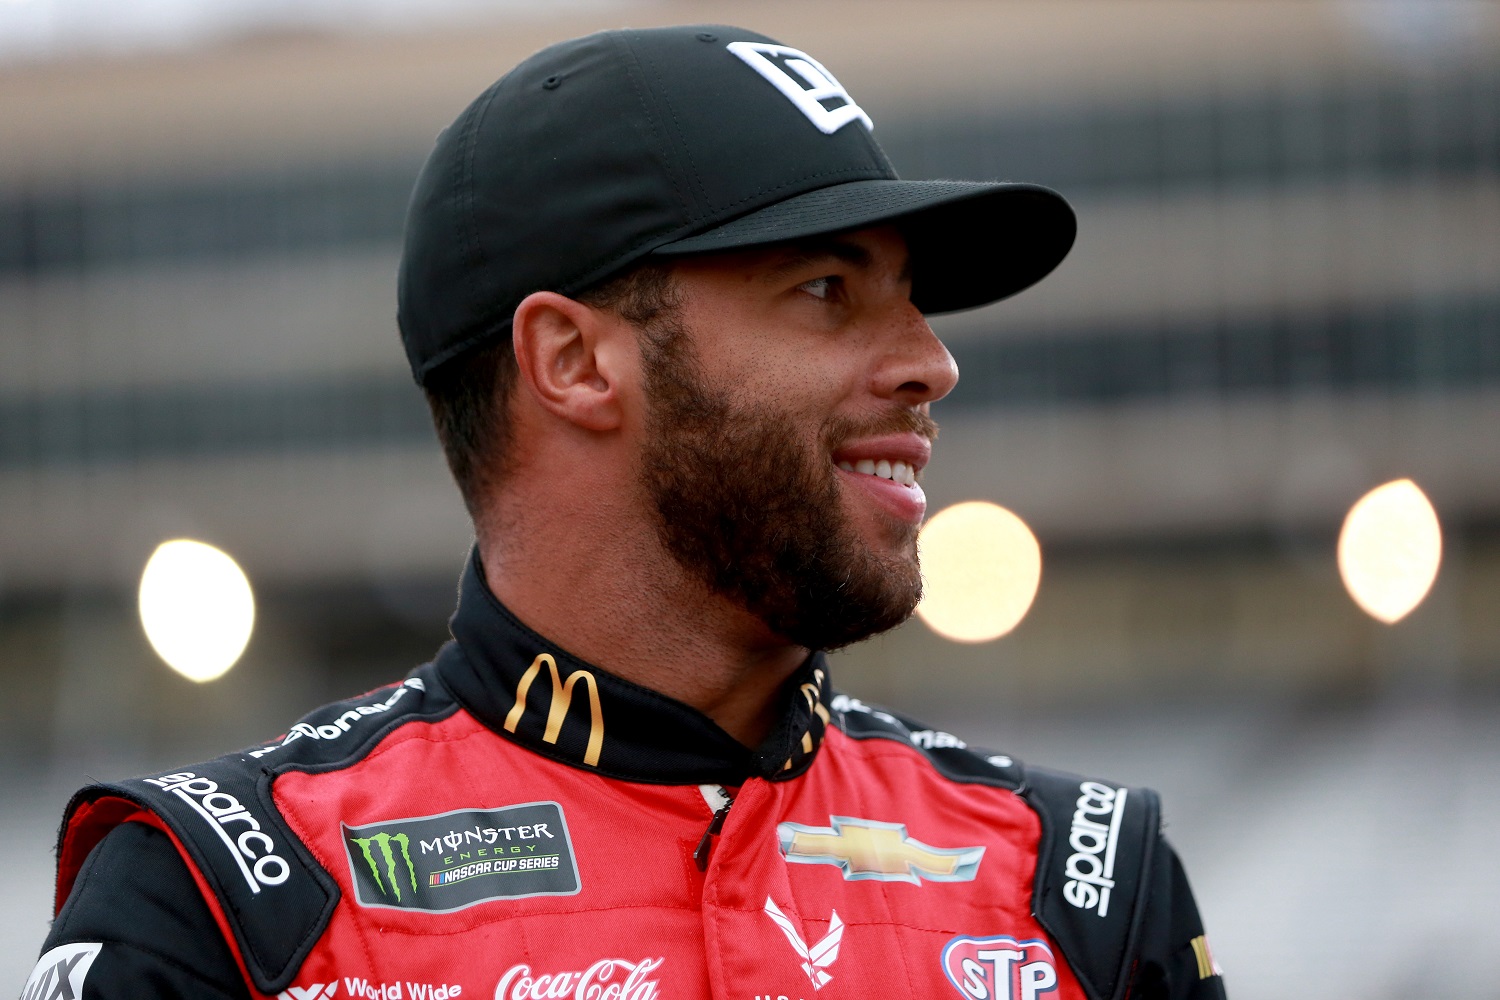 Bubba Wallace revealed on a recent podcast that he eats at McDonald's every day